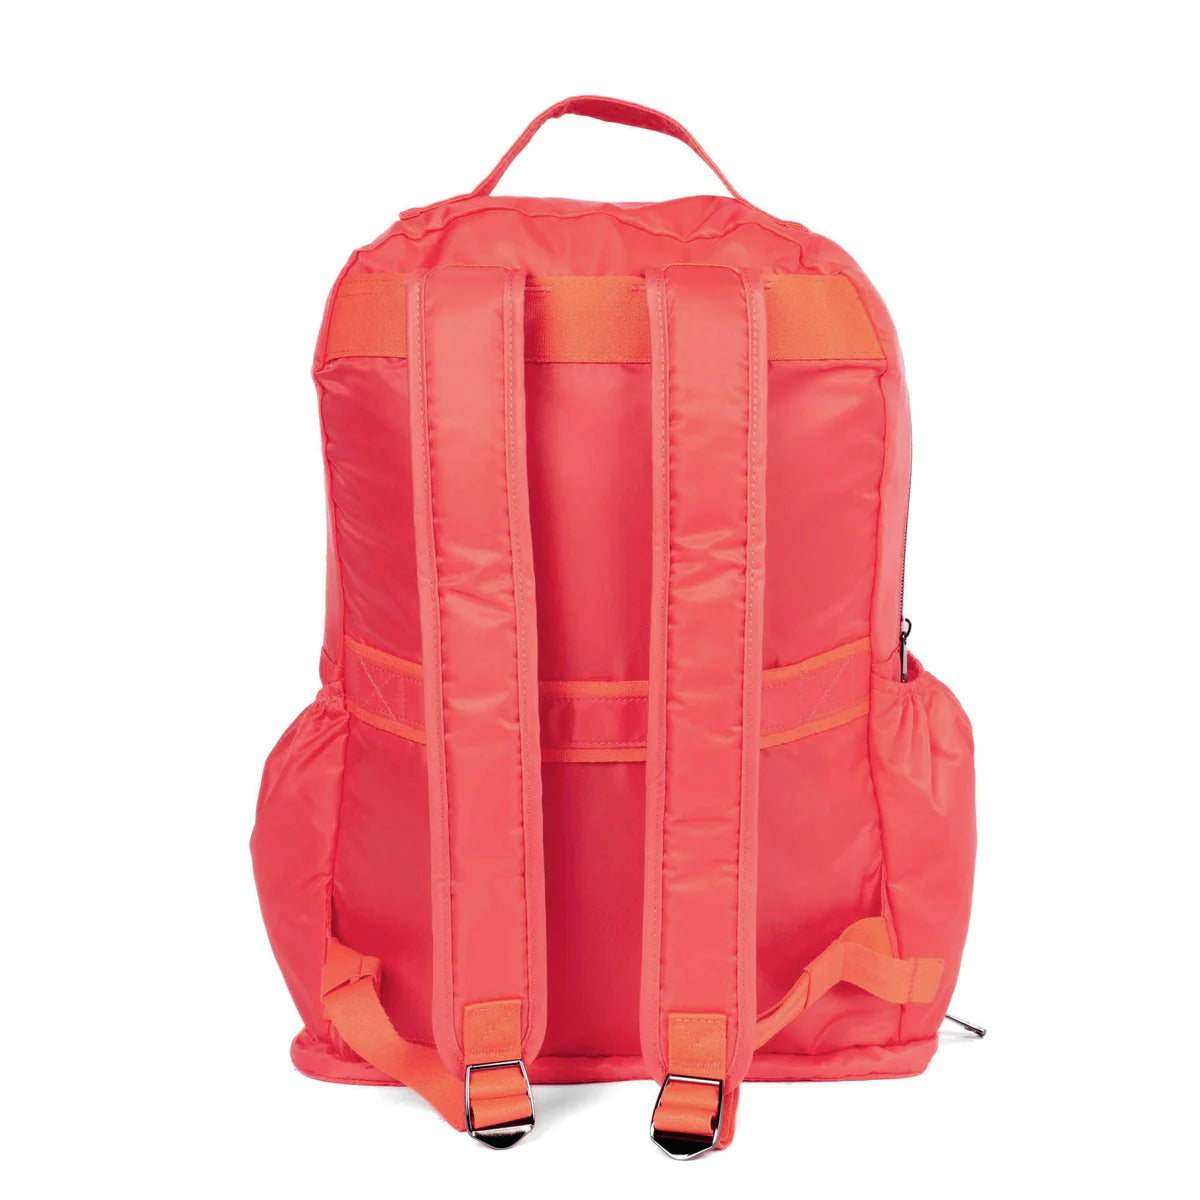 Echo 2 Packable Backpack- Fruit Punch